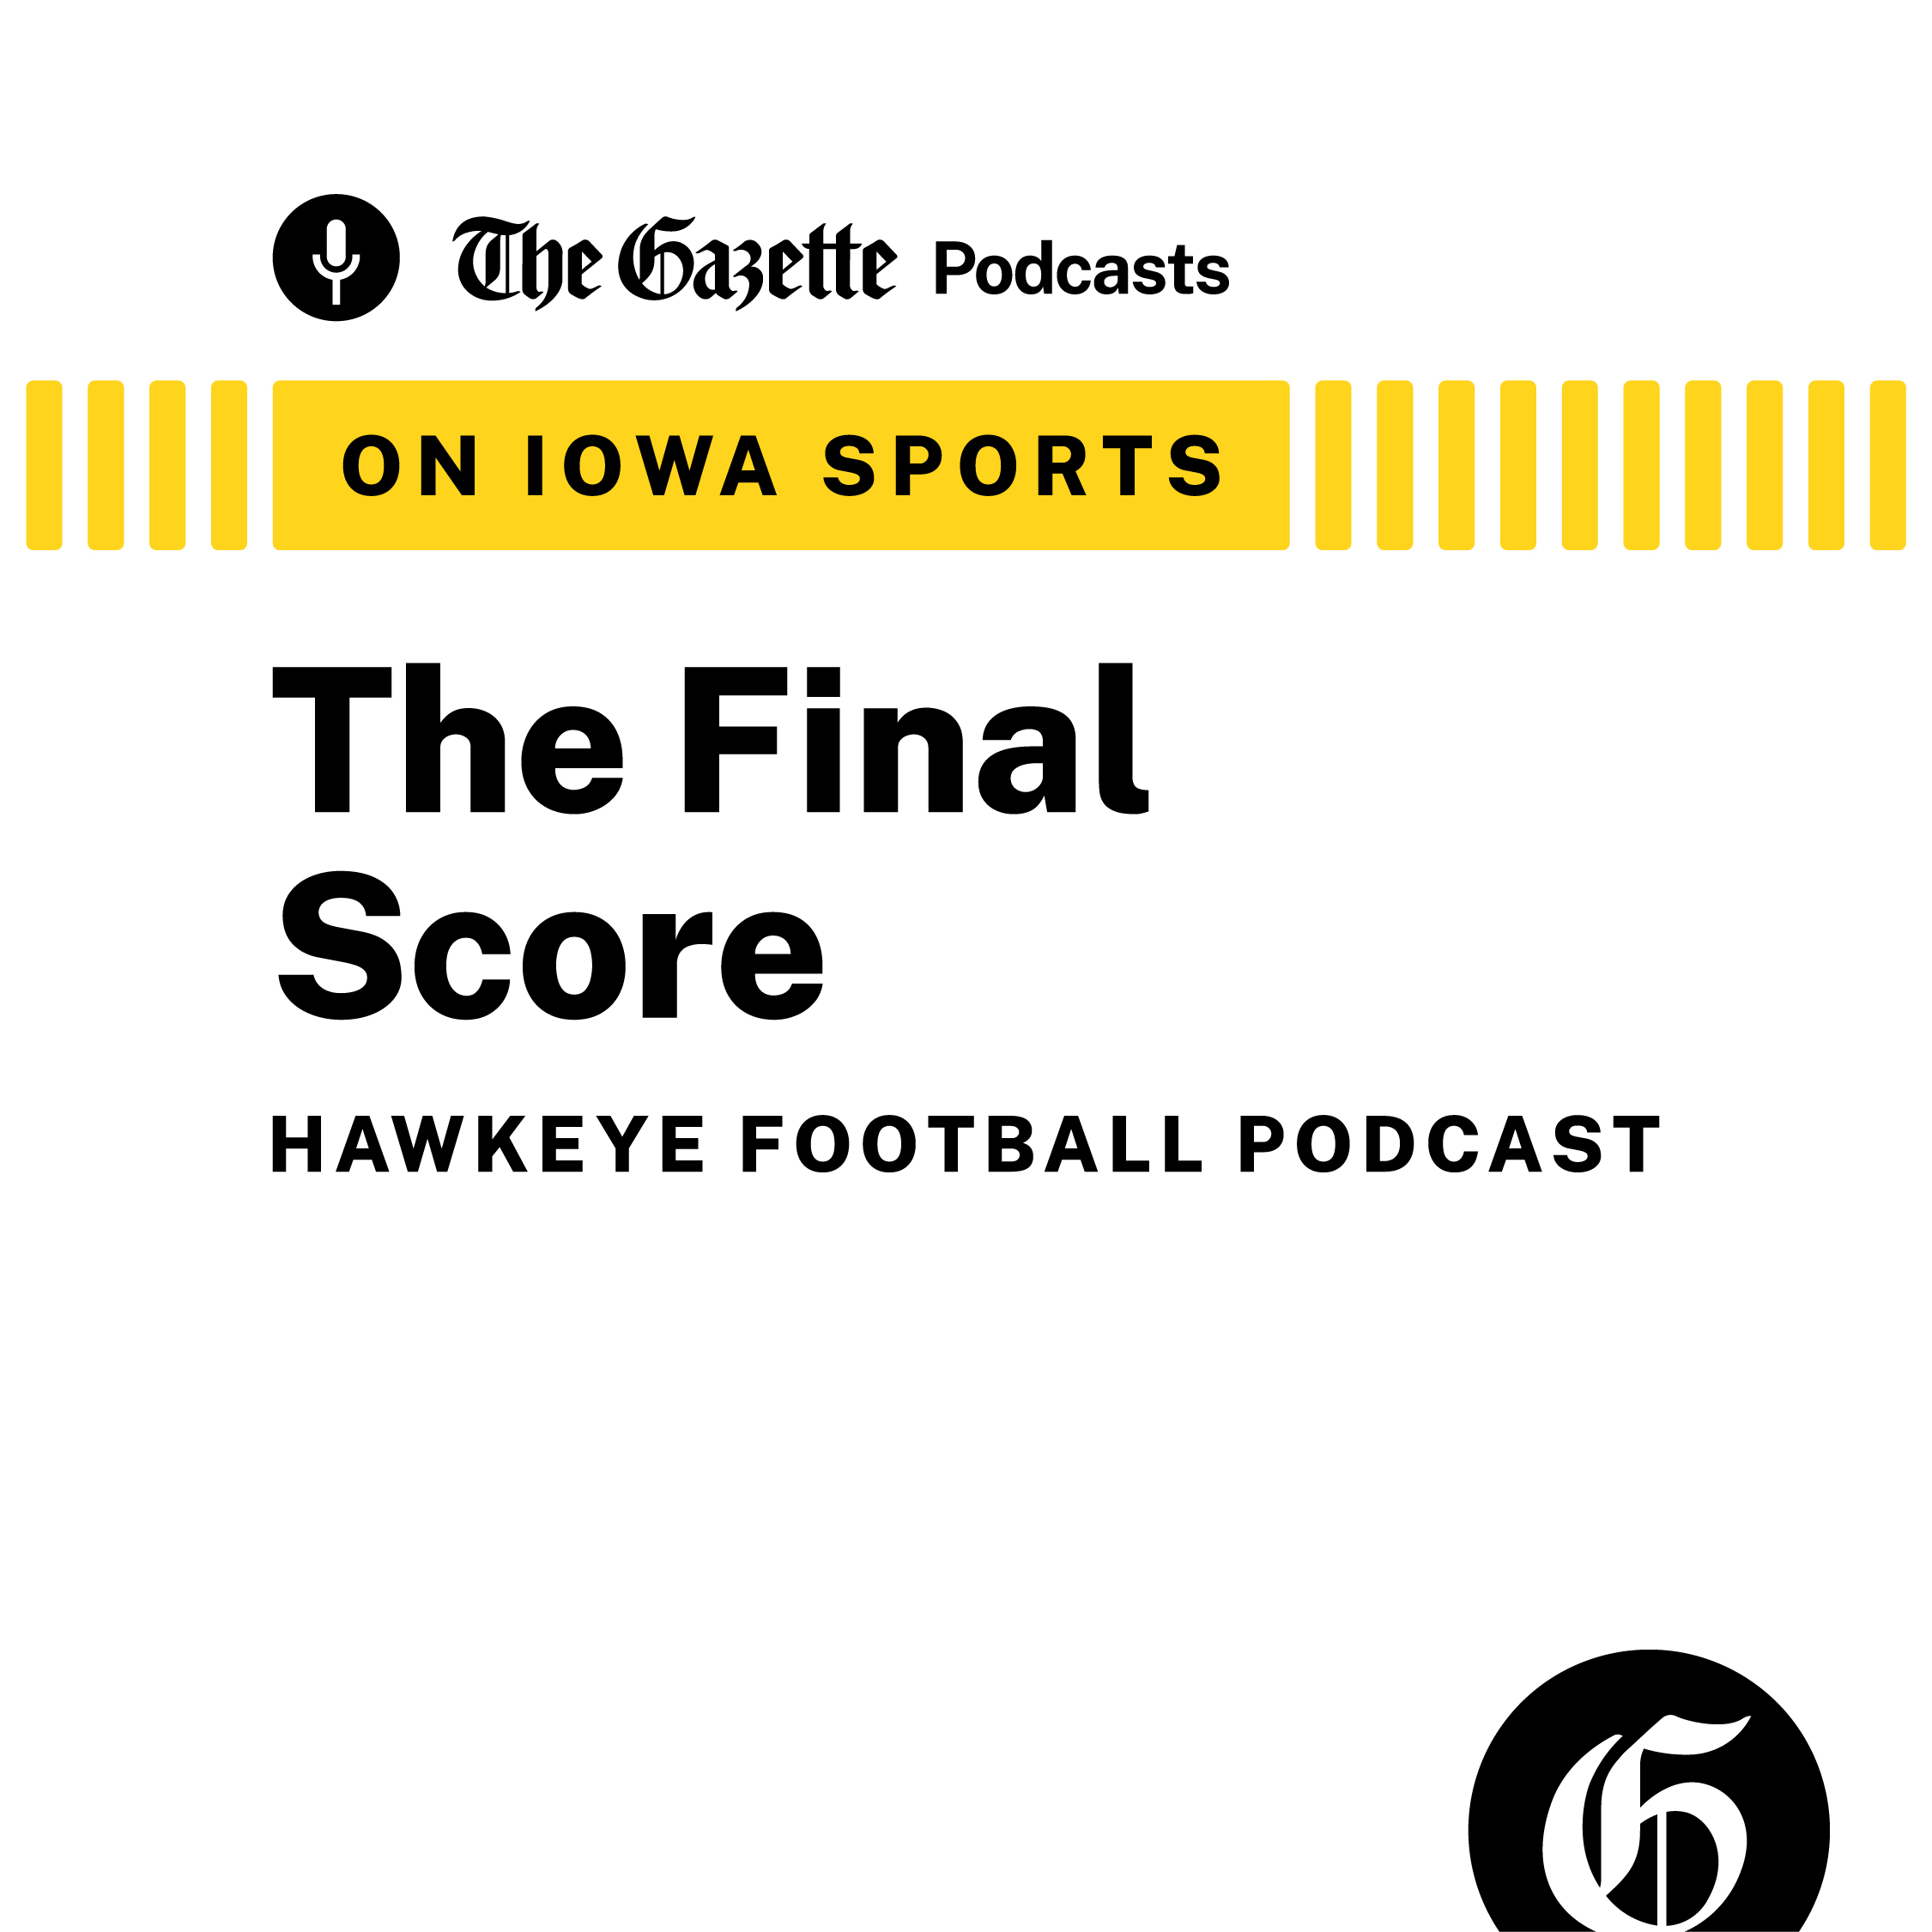 Artwork for podcast On Iowa Sports